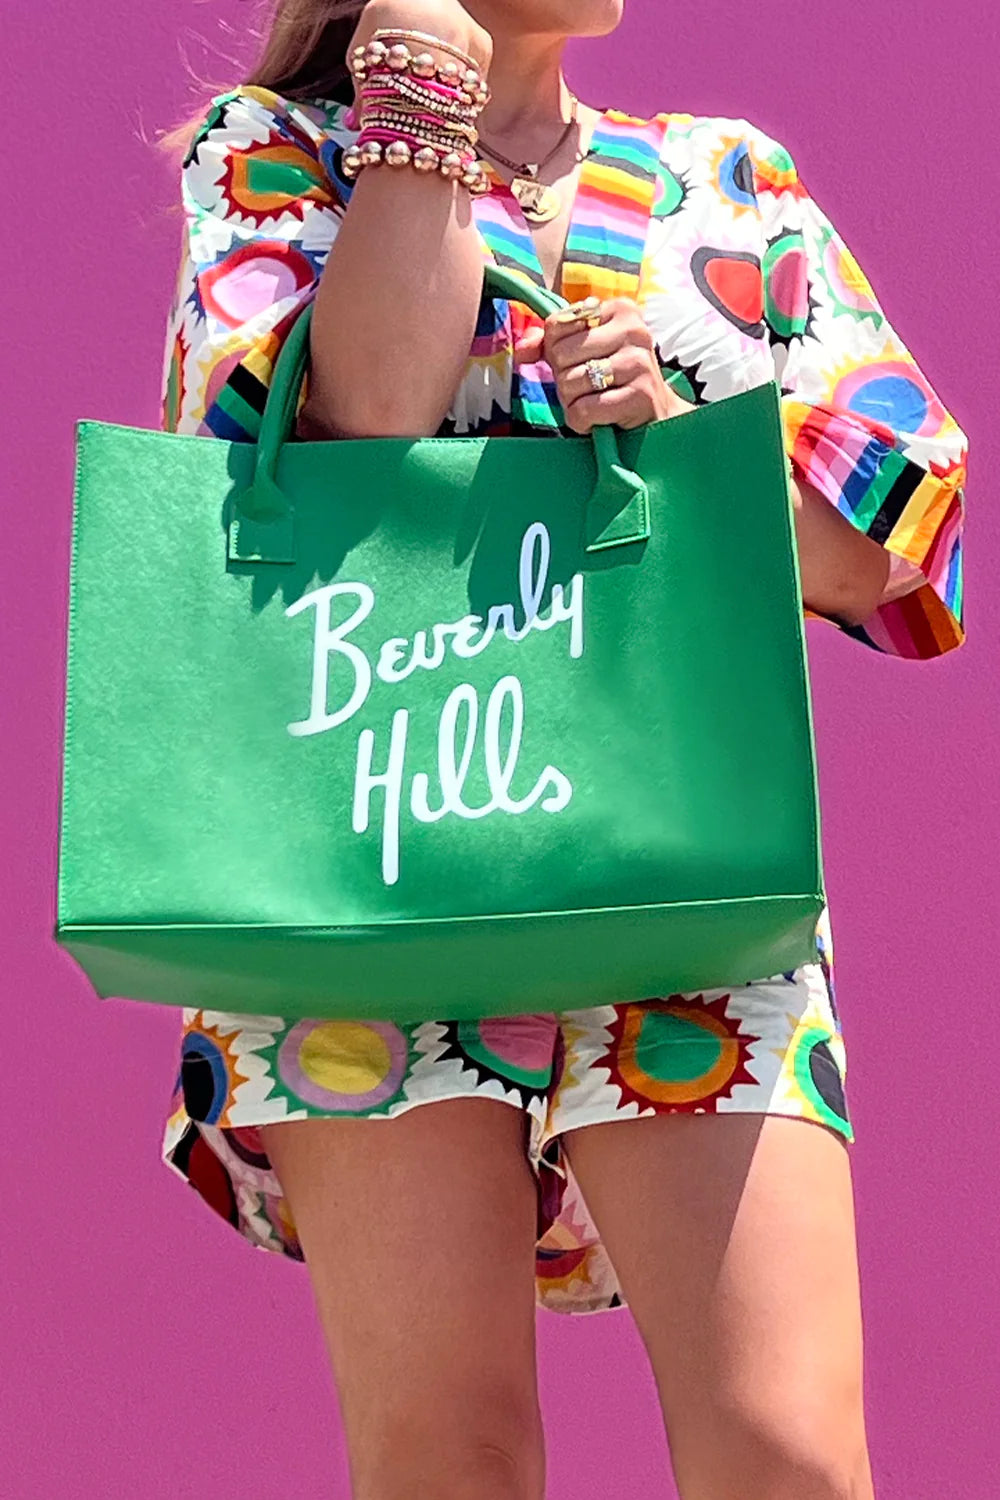 Beverly Hills Tote Bag (Green/White)